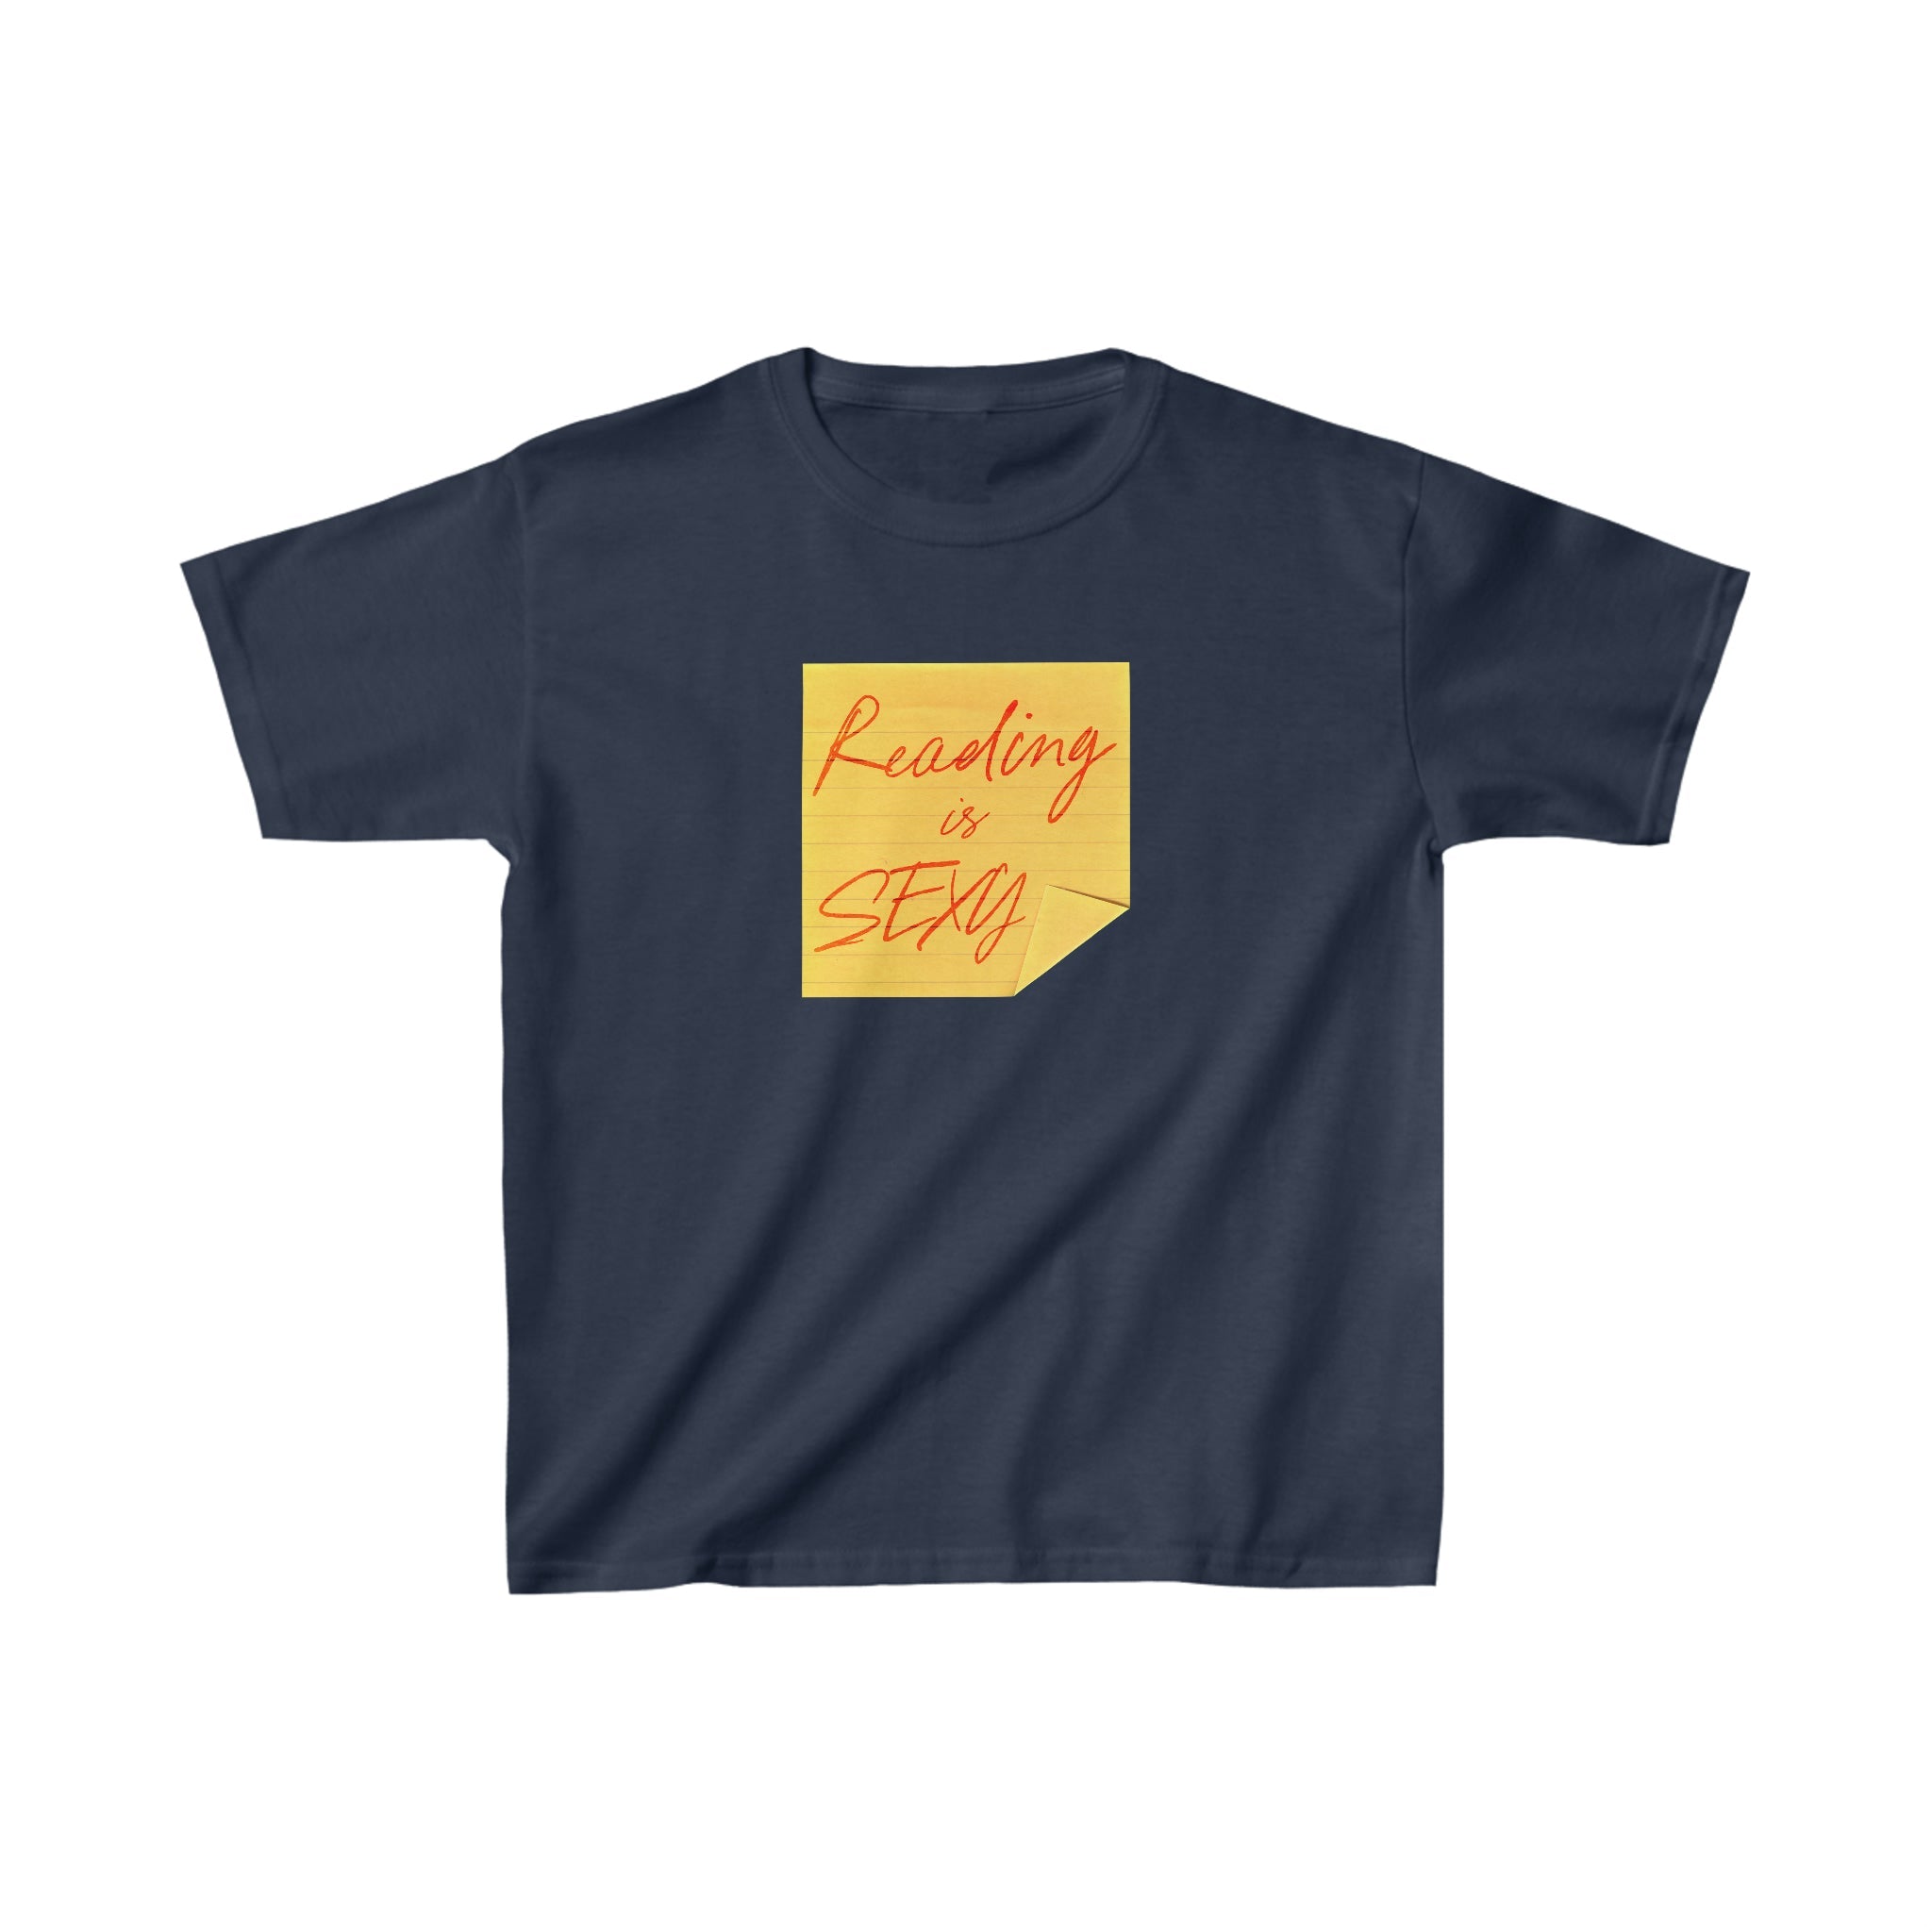 'Reading is SEXY!' baby tee - In Print We Trust